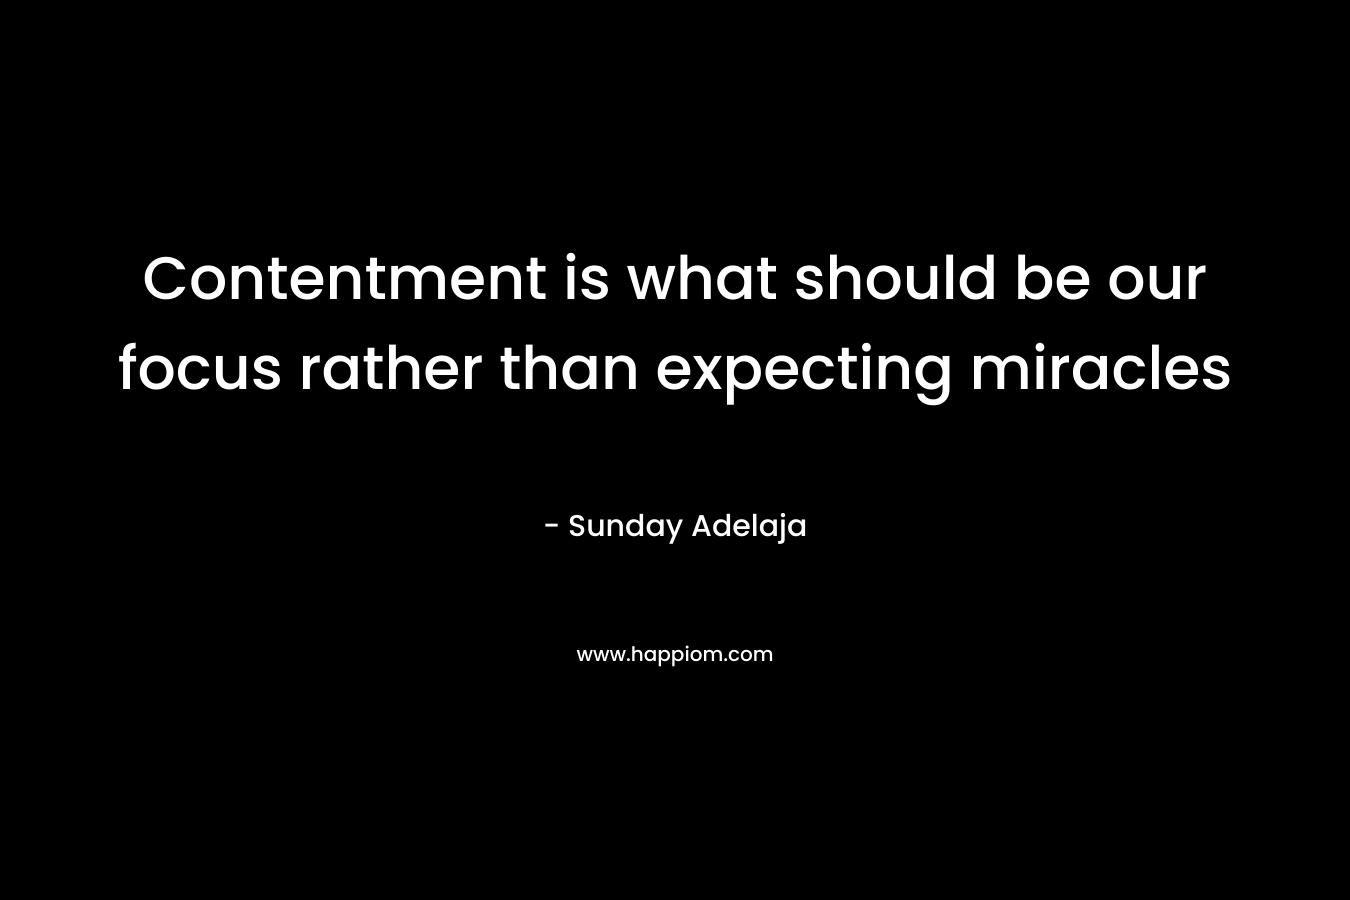 Contentment is what should be our focus rather than expecting miracles